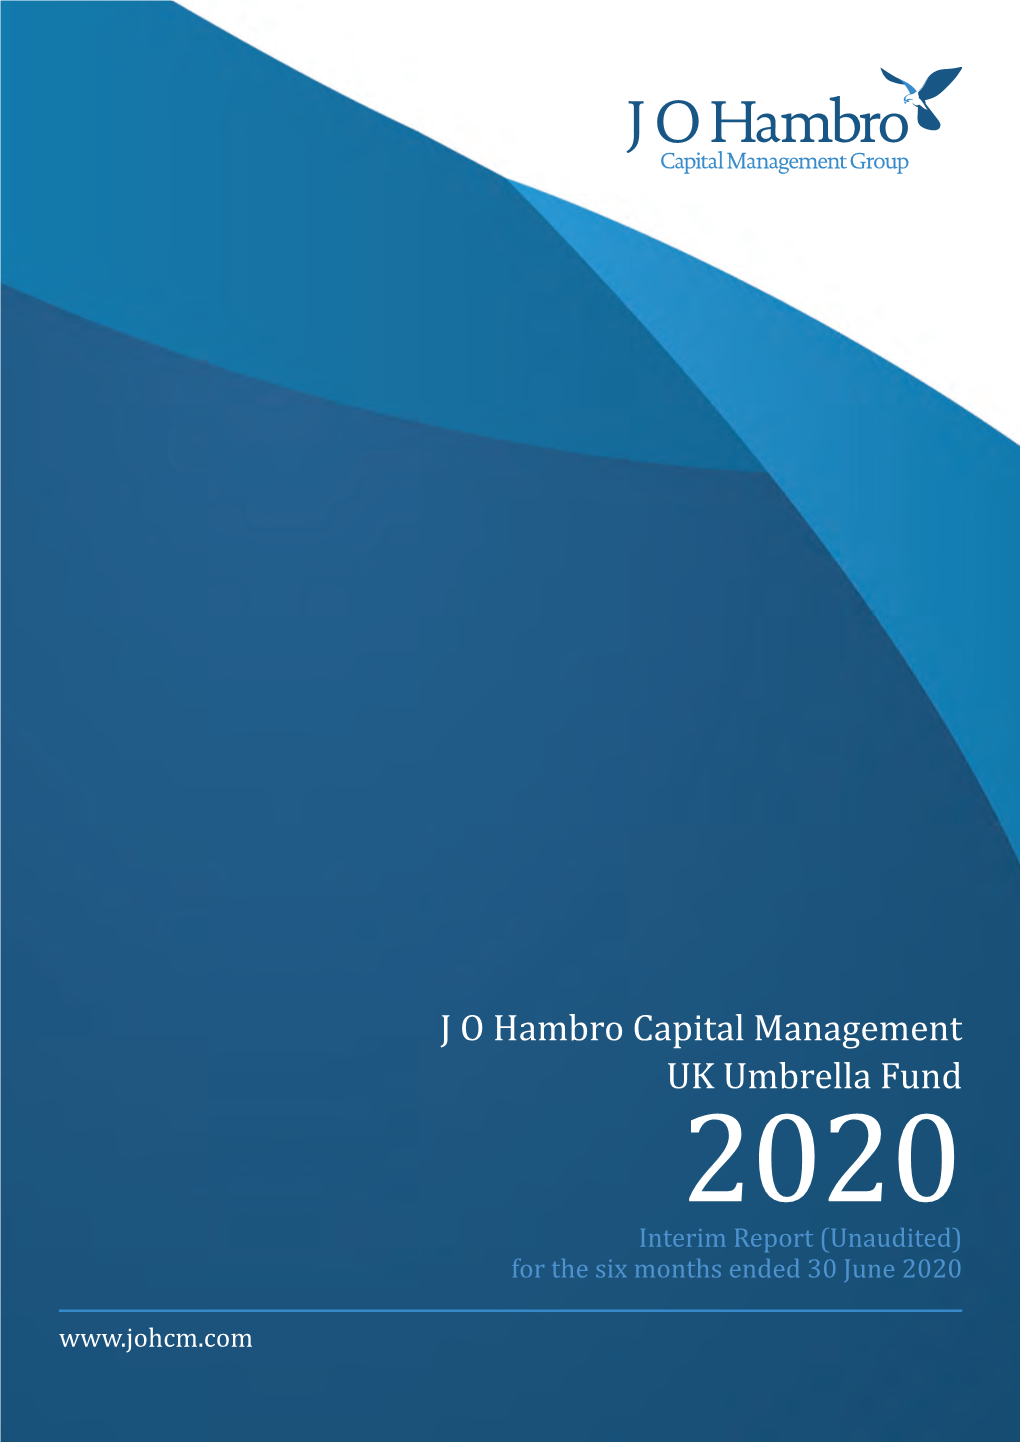 J O Hambro Capital Management UK Umbrella Fund 2020 Interim Report (Unaudited) for the Six Months Ended 30 June 2020 Contents